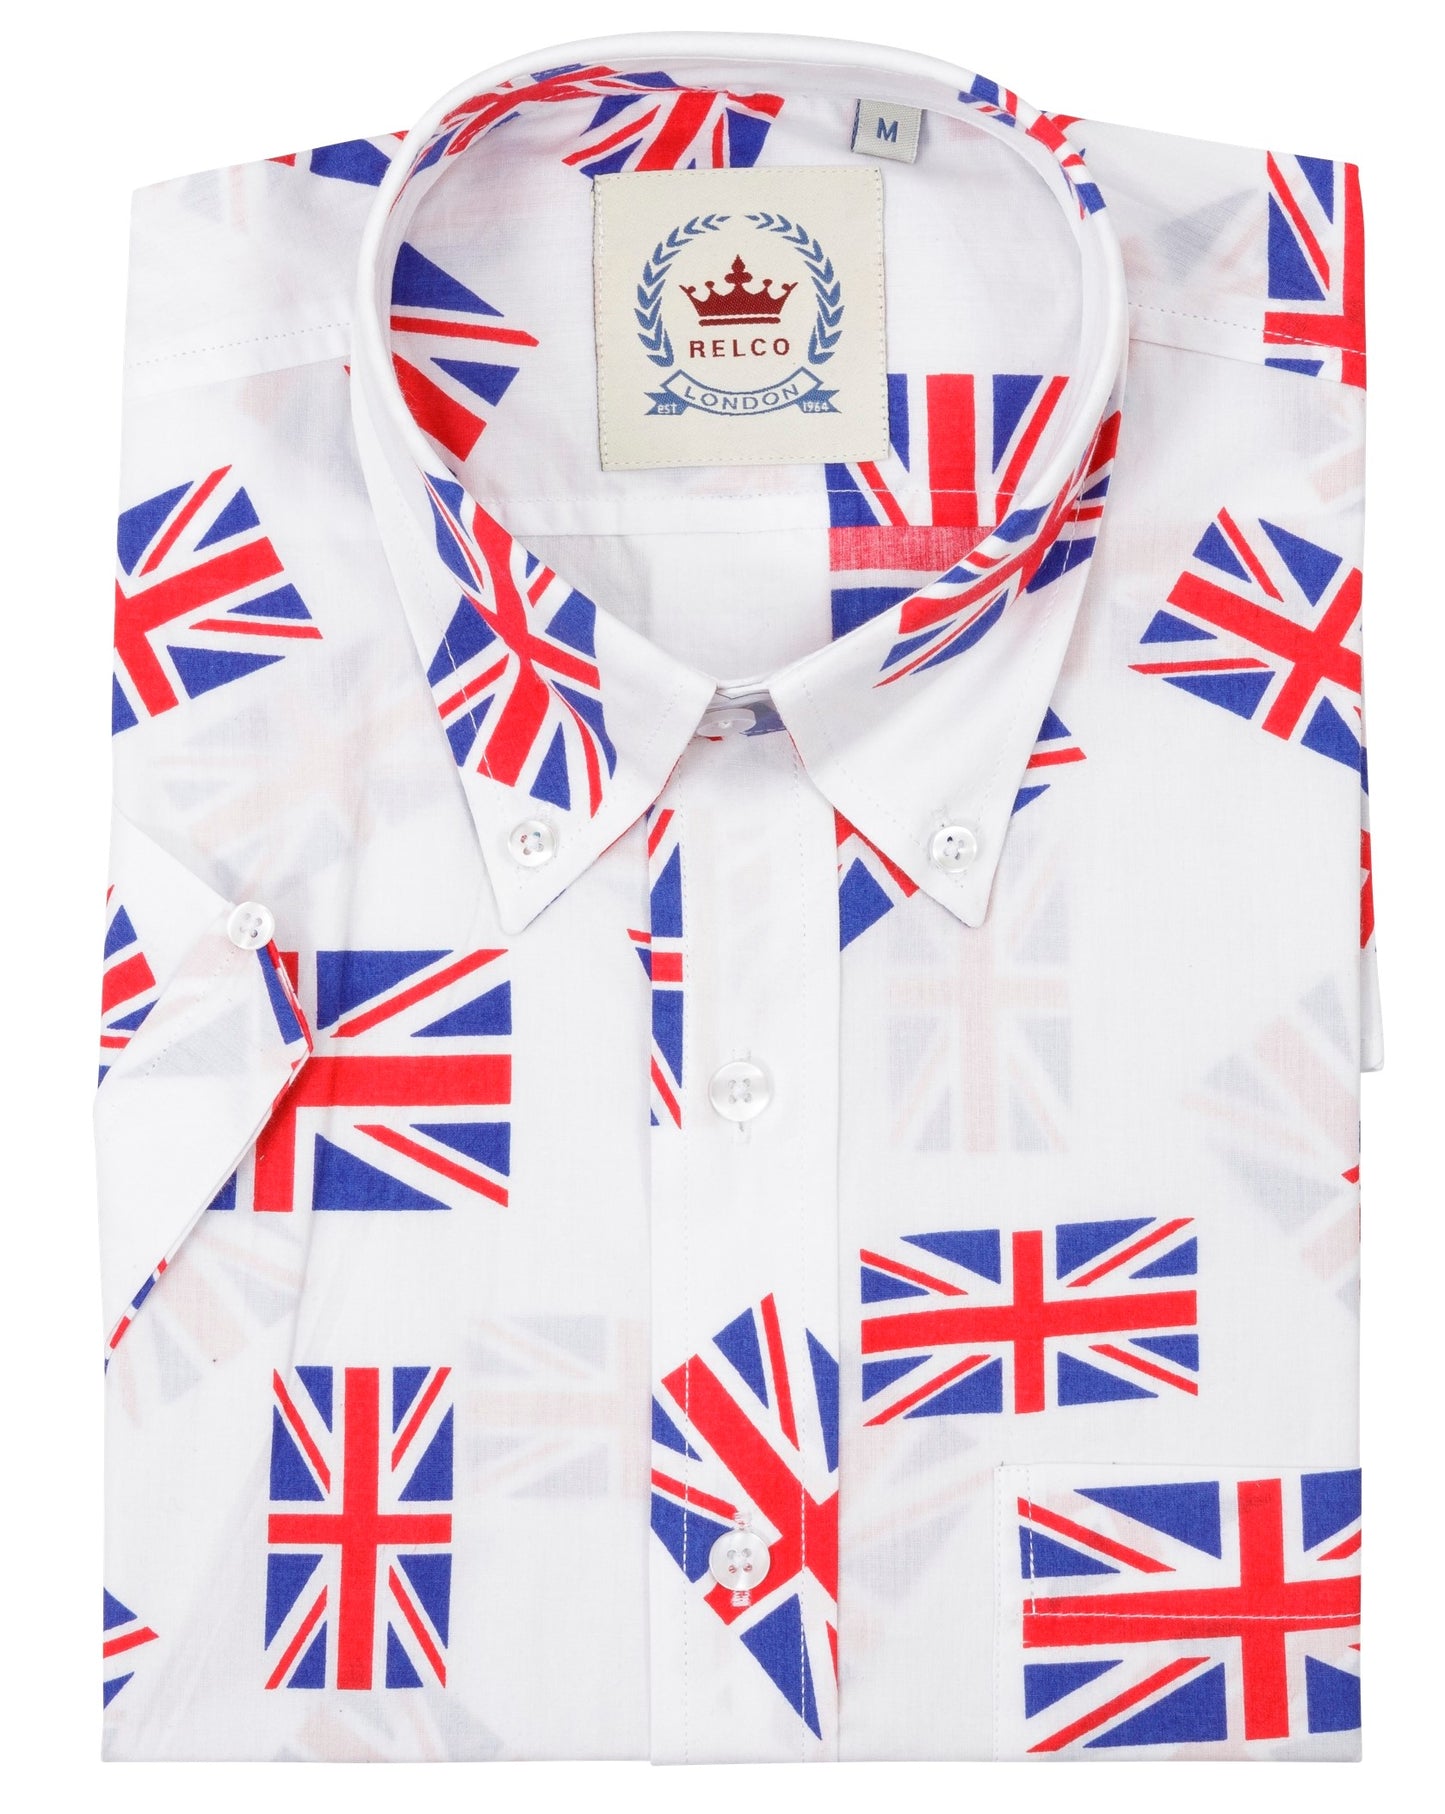 Relco Mens Union Jack Short Sleeved Button Down Shirts